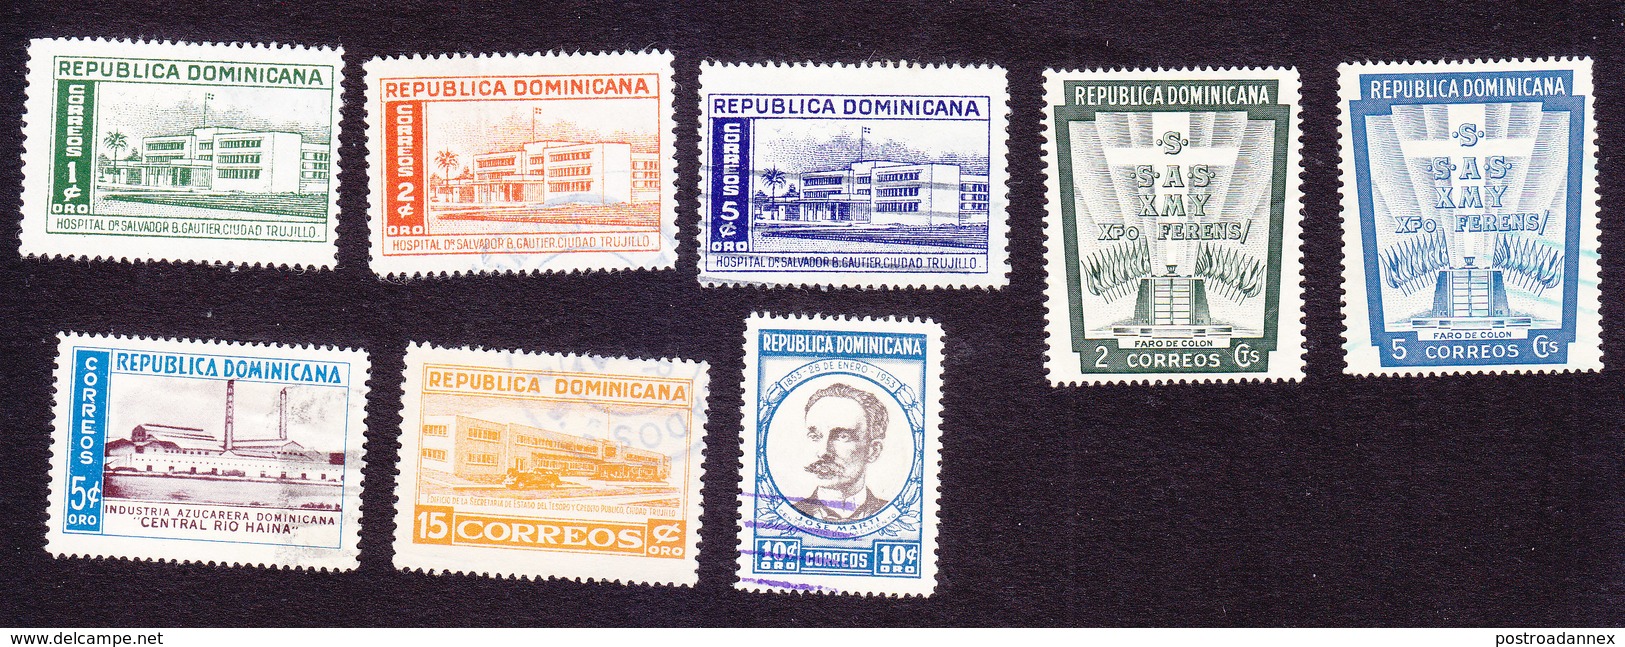 Dominican Republic, Scott #447-451, 455-457, Used, Hospital, Columbus Lighthouse, Industry, Marti, Issued 1952-54 - Dominikanische Rep.